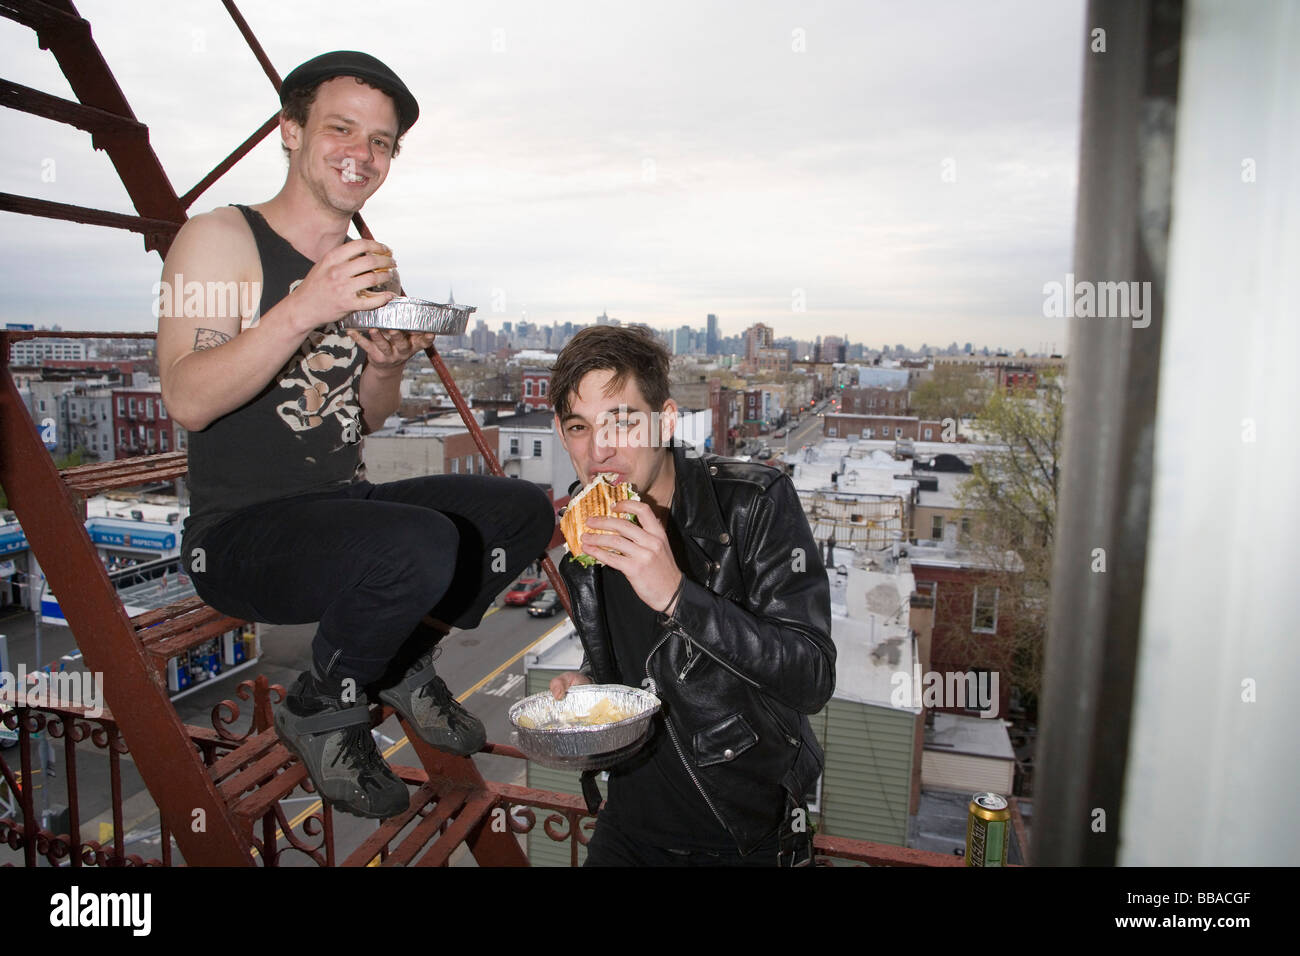 Two young men eating take out food on a fire escape Stock Photo